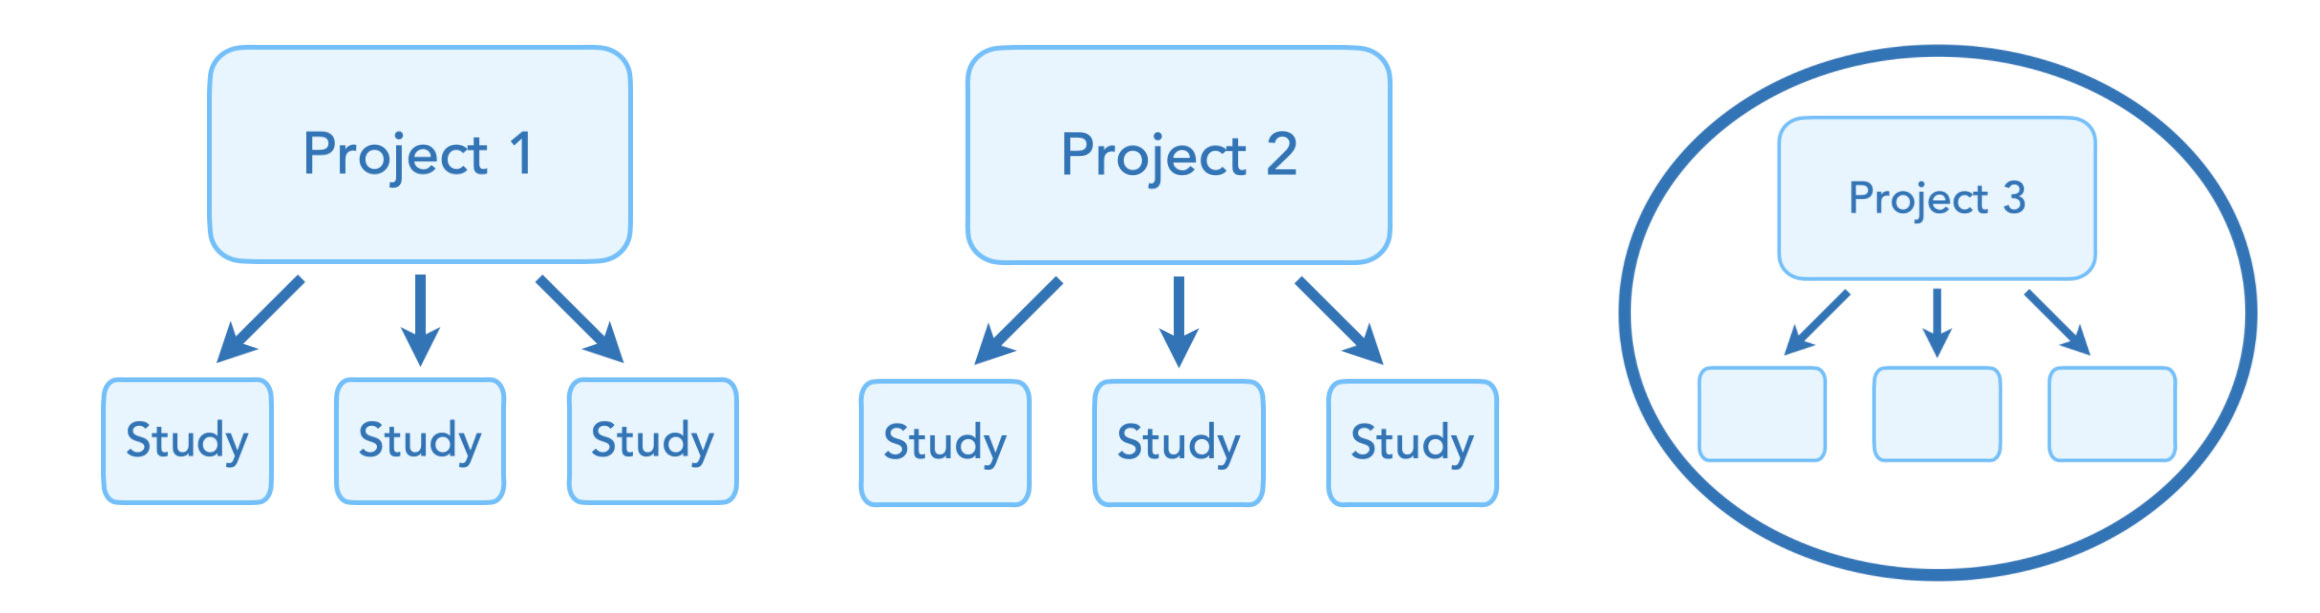 Diagrams of three projects. Each project is numbered (Project 1, Project 2, Project 3) and has three boxes below it, connected with arrows from the box surrounding the project name. For Project 1 and Project 2, each smaller box says Study. The boxes under Project 3 are empty.